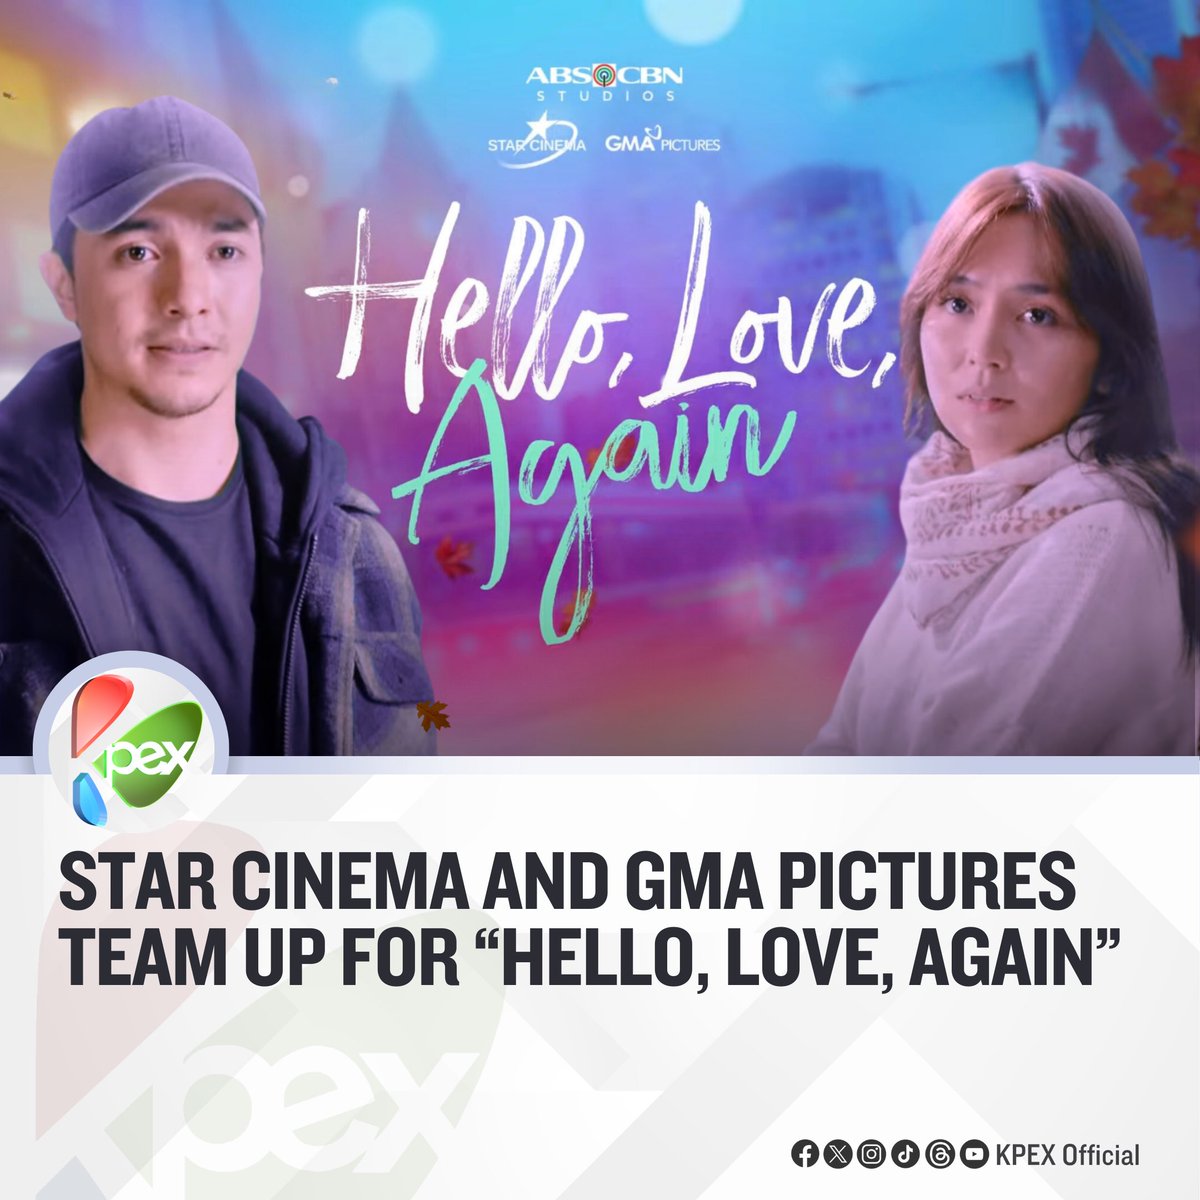 STAR CINEMA AND GMA PICTURES TEAM UP FOR “HELLO, LOVE, AGAIN”   In another historic collaboration, ABS-CBN’s Star Cinema and GMA Pictures are teaming up for the first time to produce “Hello, Love, Again,” the highly anticipated sequel to the blockbuster hit 'Hello, Love,